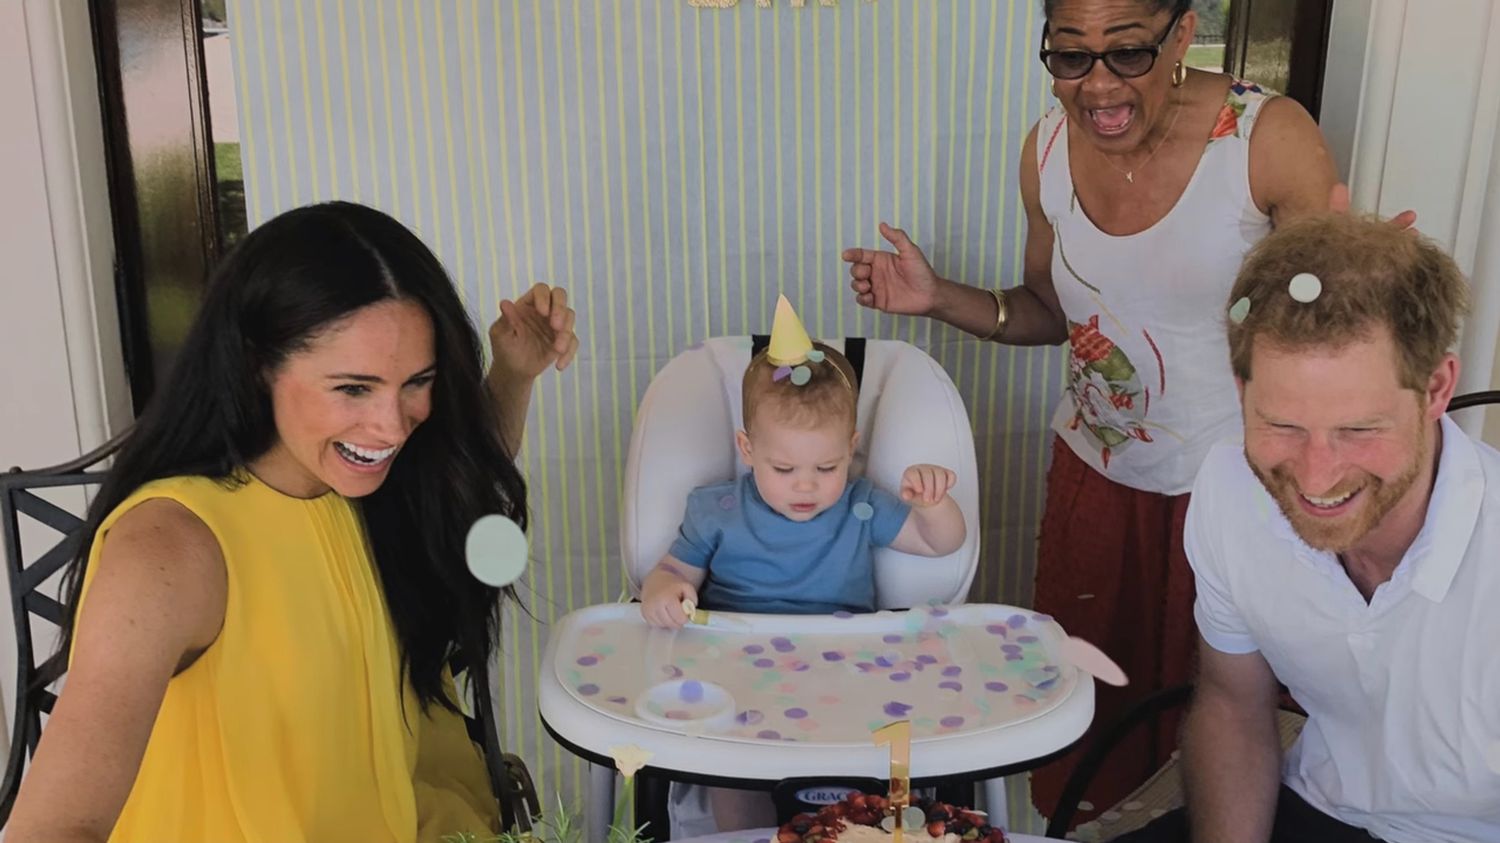 Meghan Markle and Prince Harry have a 5-year-old son! Prince Archie turned 5 on May 6, and PEOPLE understands the family is celebrating his birthday privately before the Duke and Duchess of Sussex's upcoming travel plans